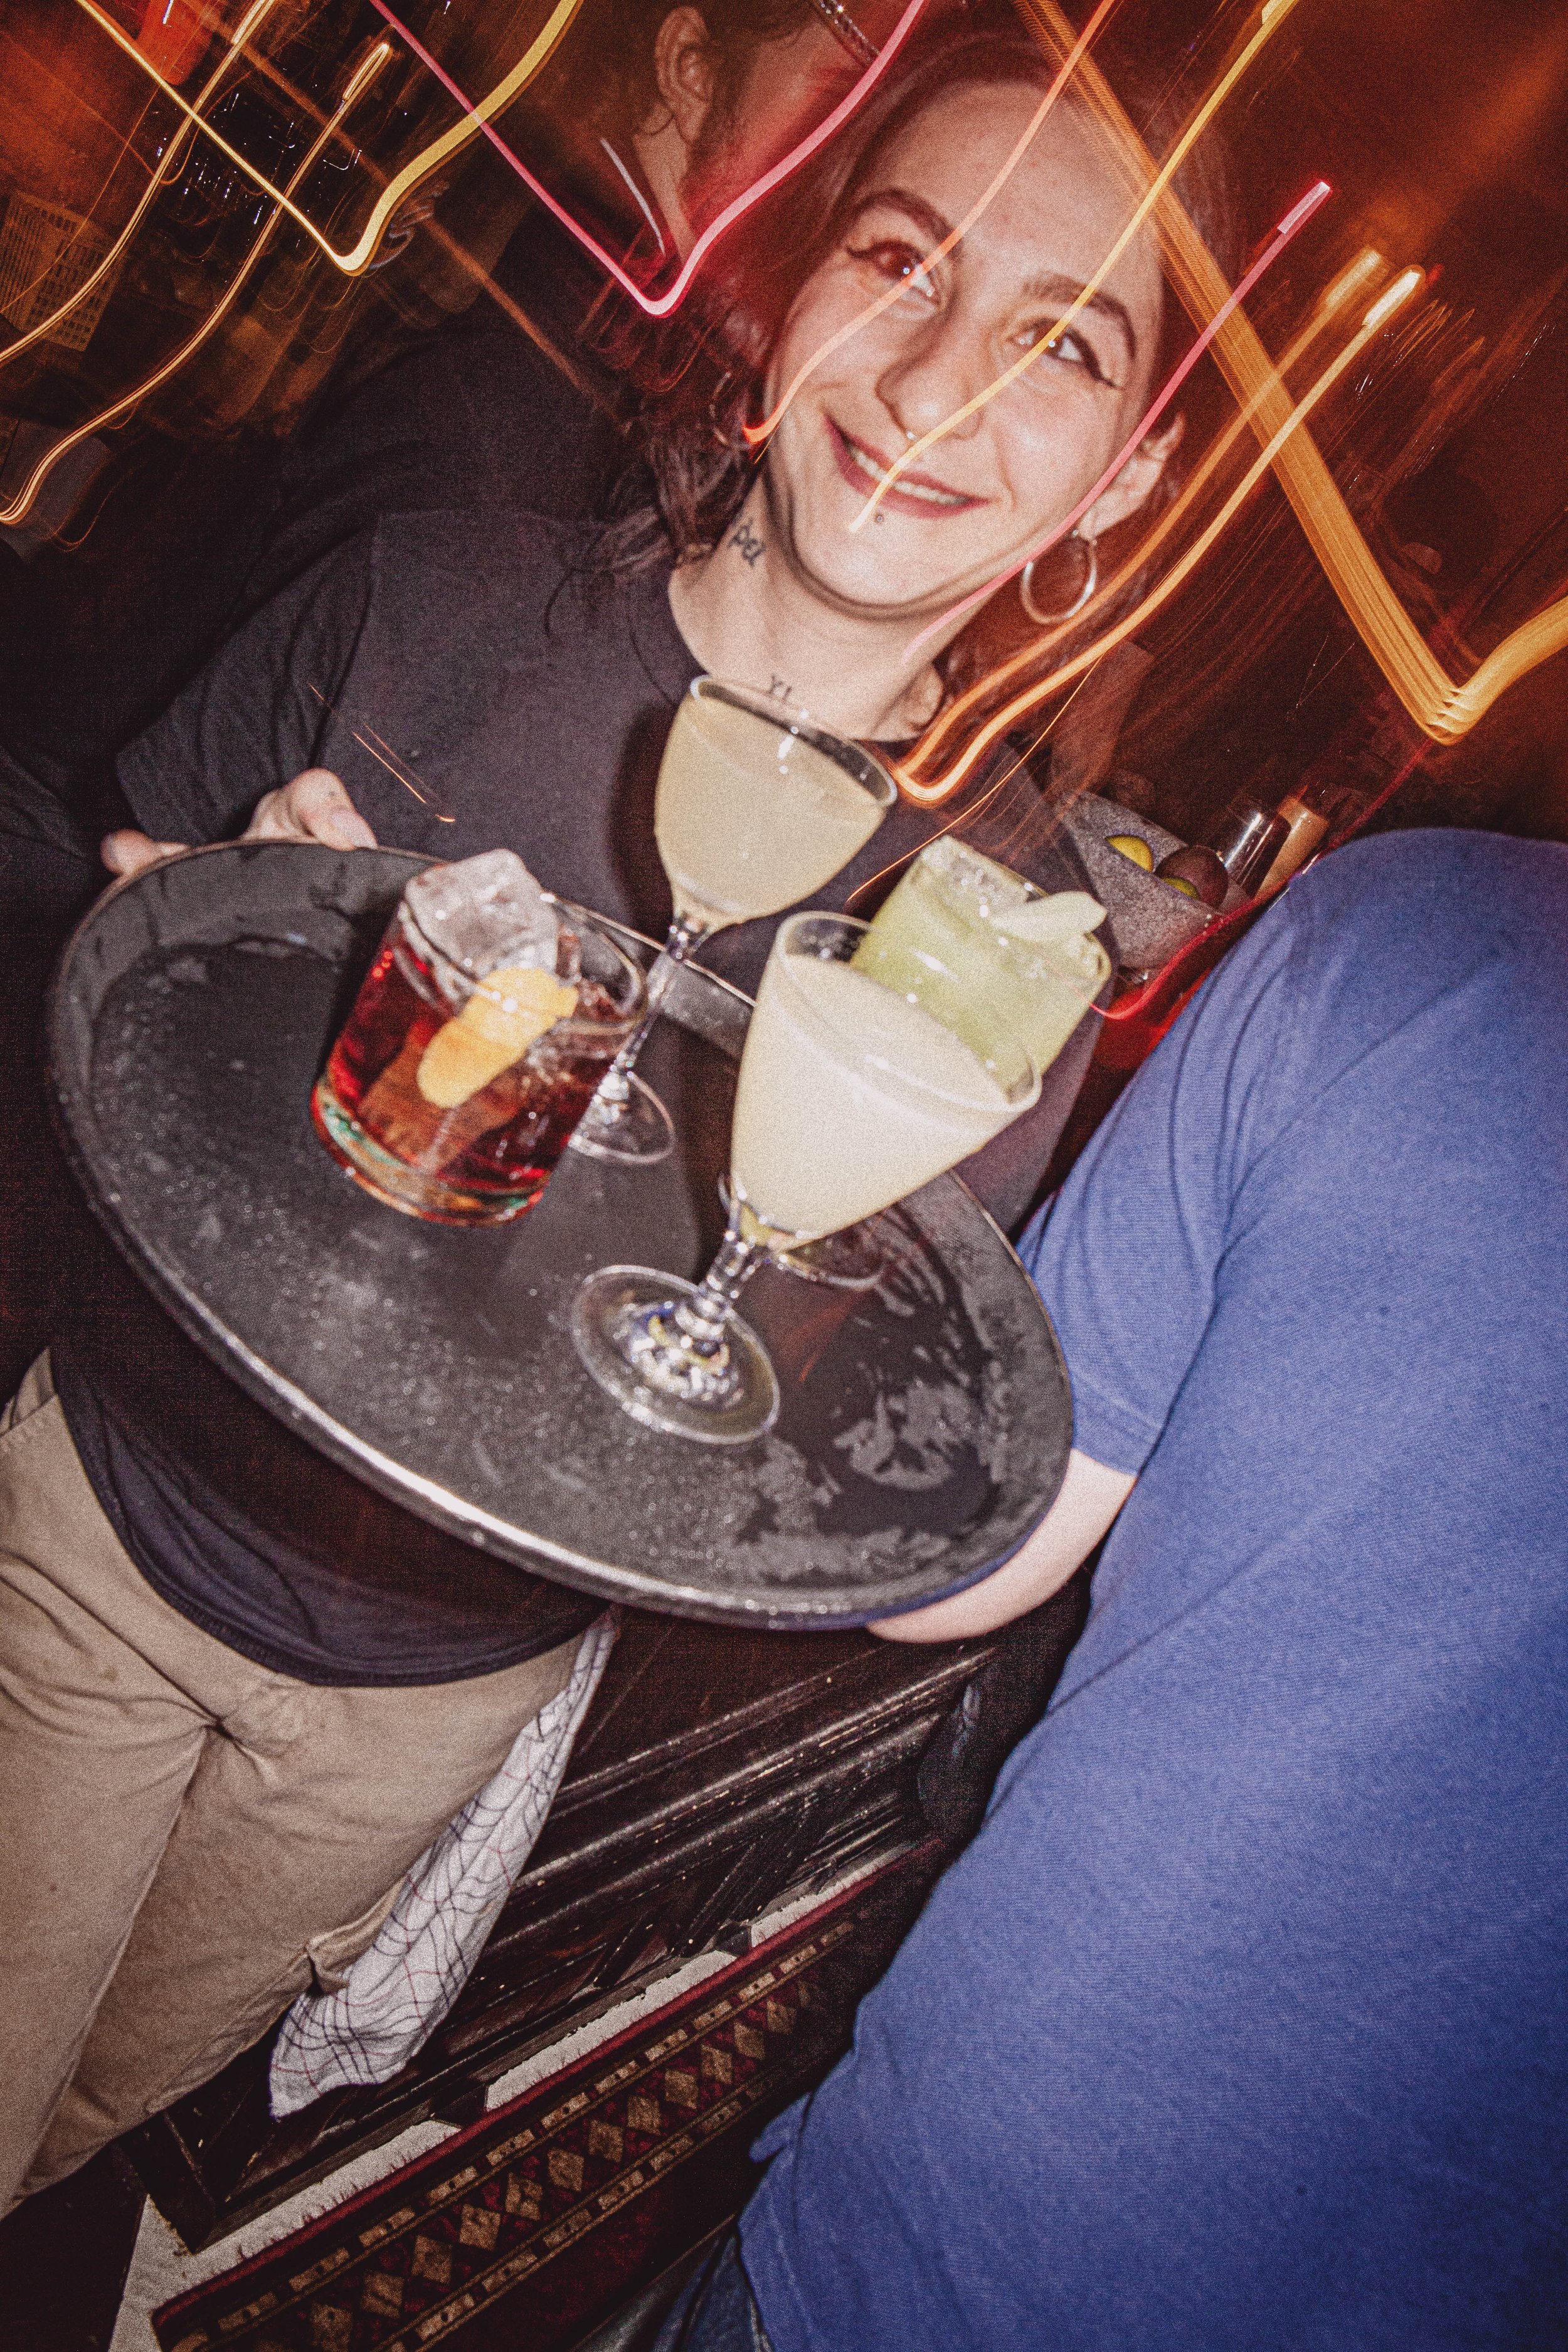  Elettra Mortillaro serving smiles and drinks during guest shift w. La Punta (IT) @Barking Dog   Sponsored by Tequila Ocho 